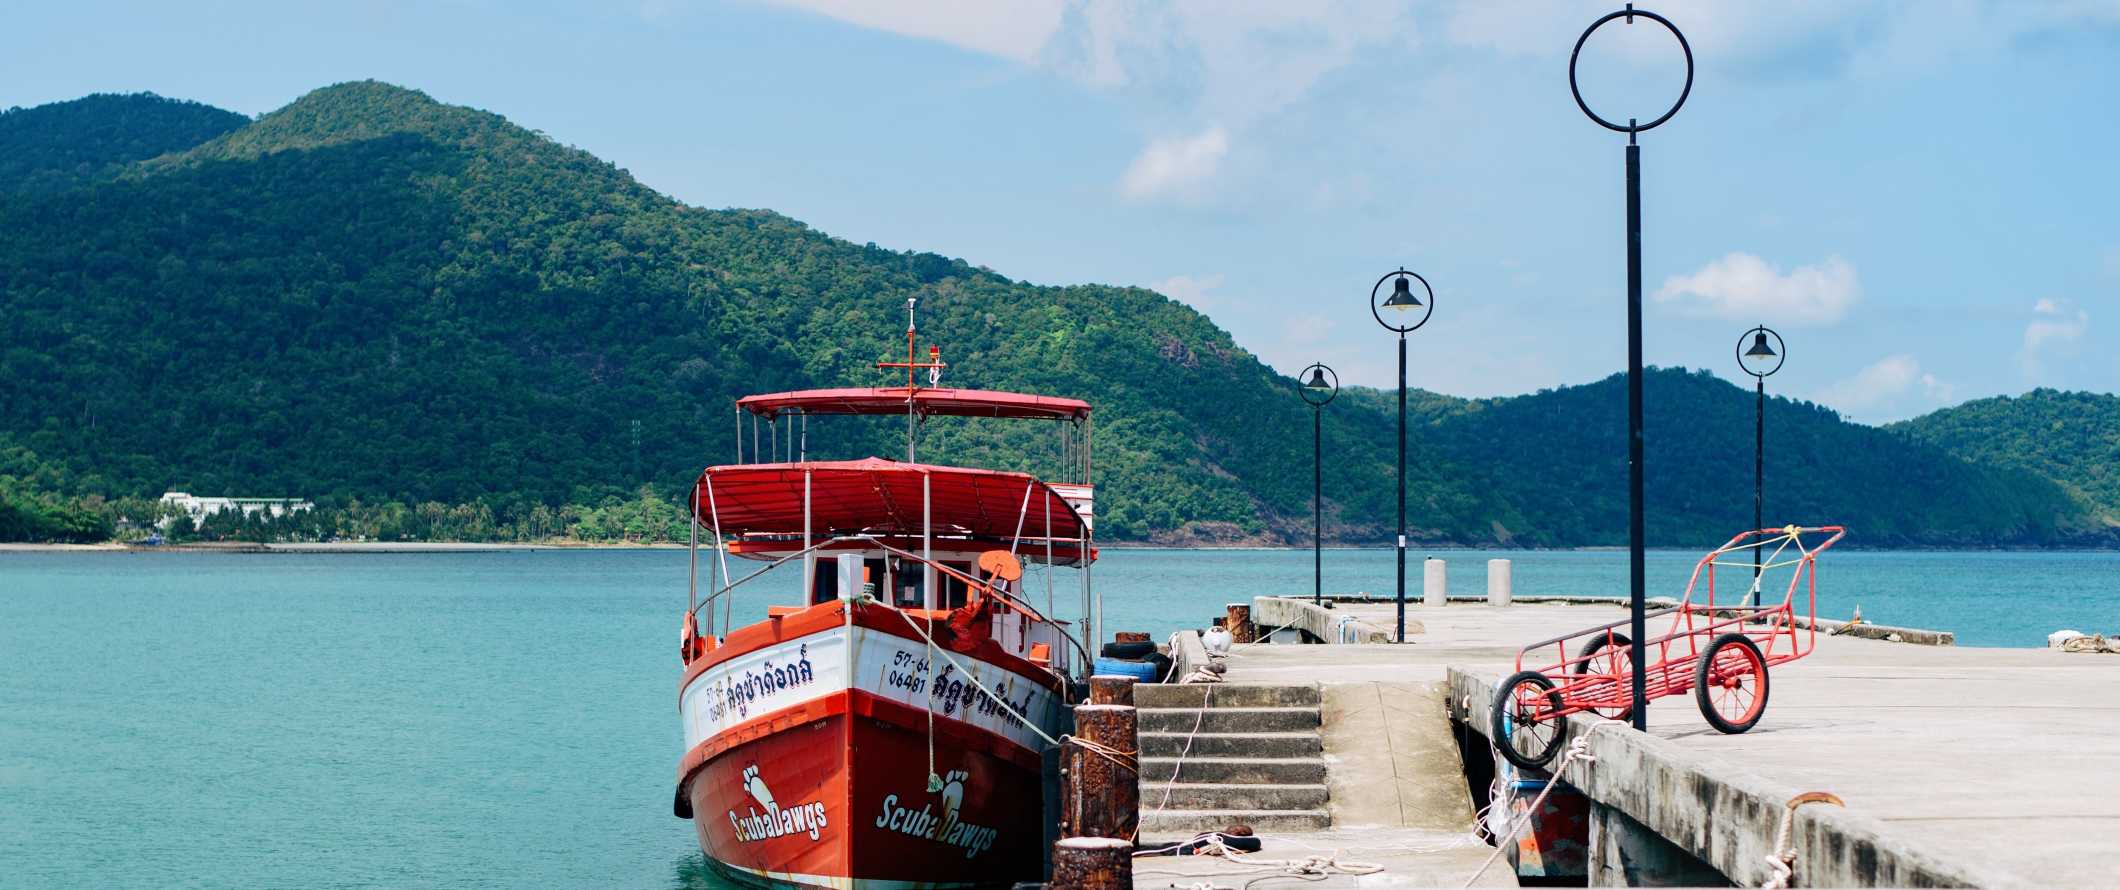 A ferry boat at a dock in Ko Chang, Thailand on a sunny day